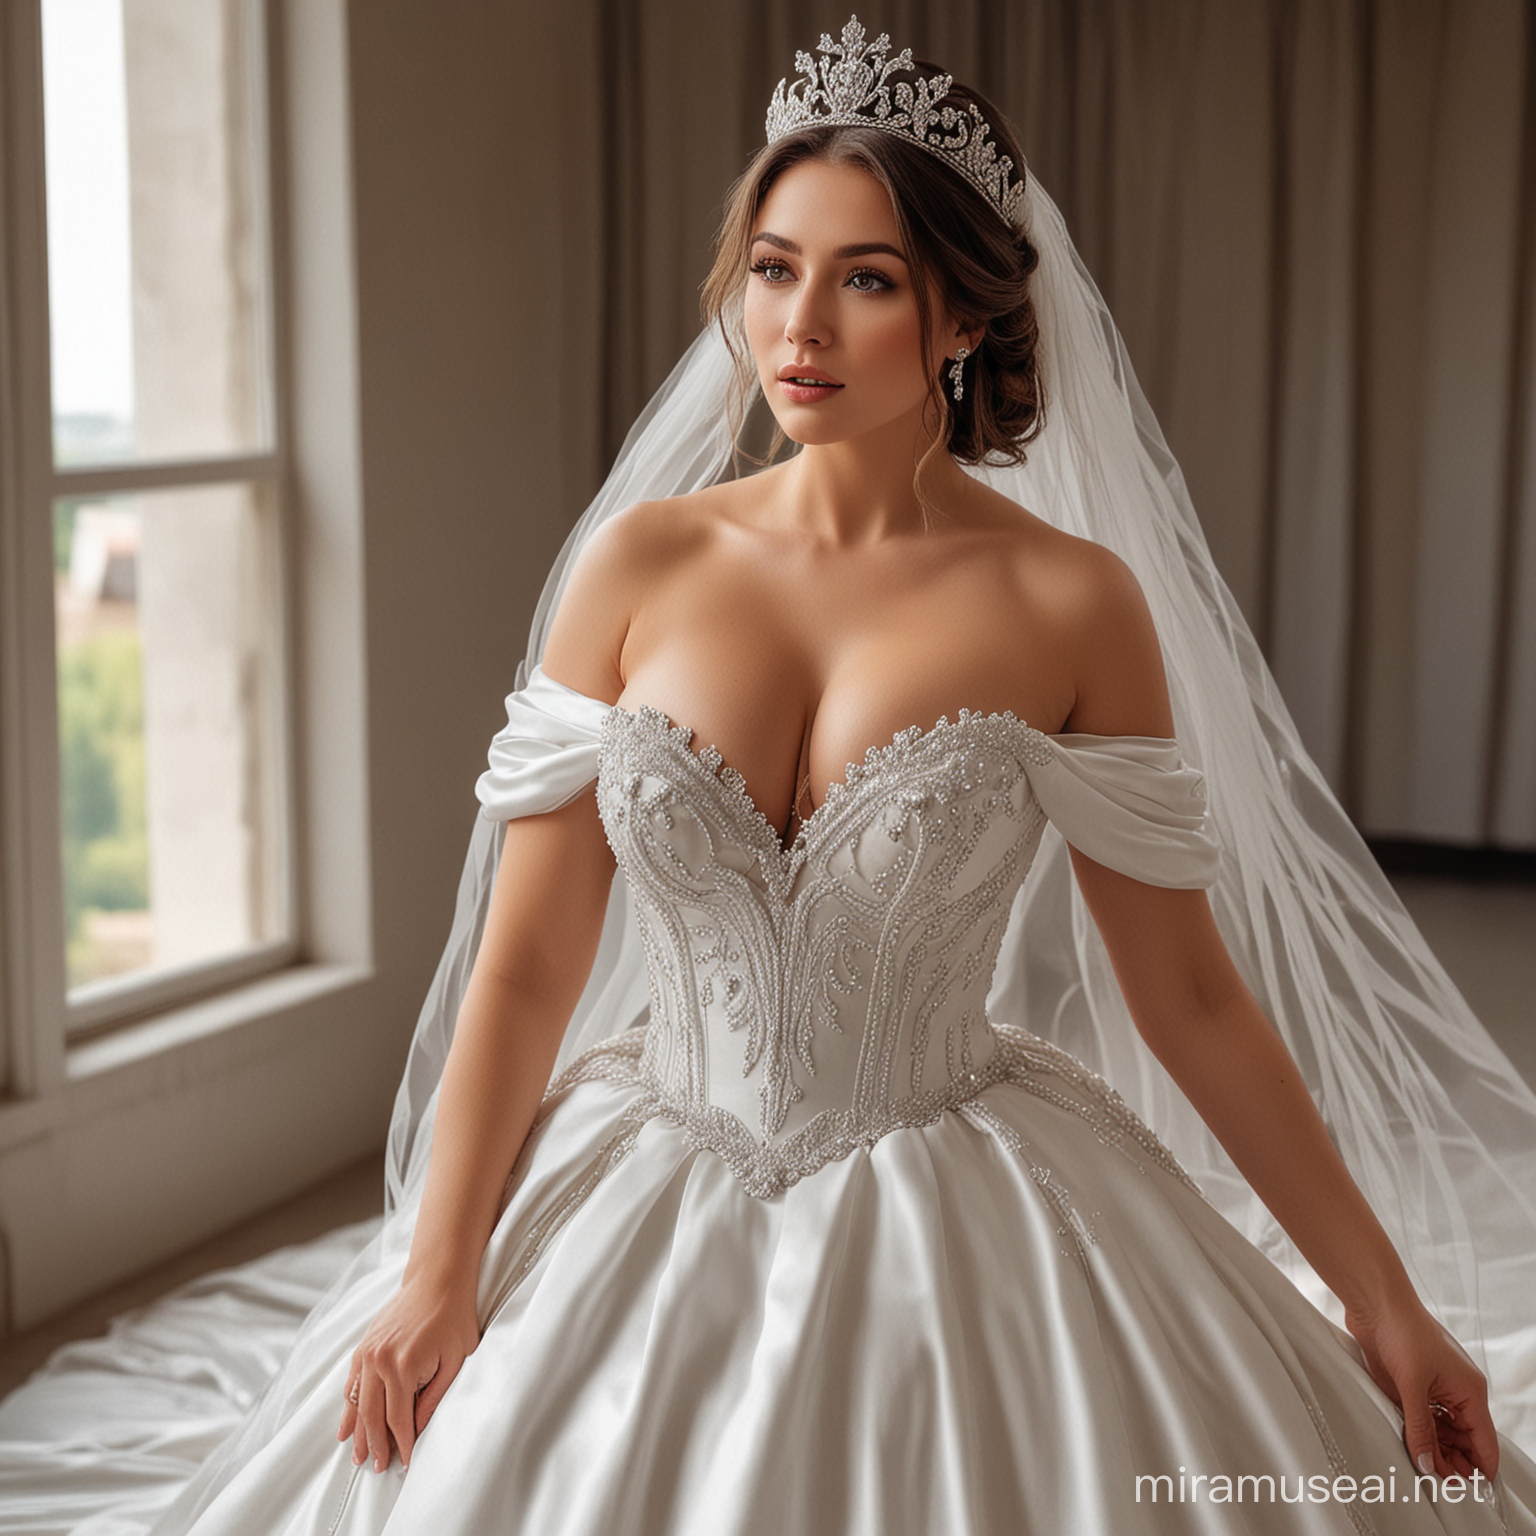 admiring the beauty of this masterpiece, a stunning hot woman with big breast and white wedding dress wearing crown.